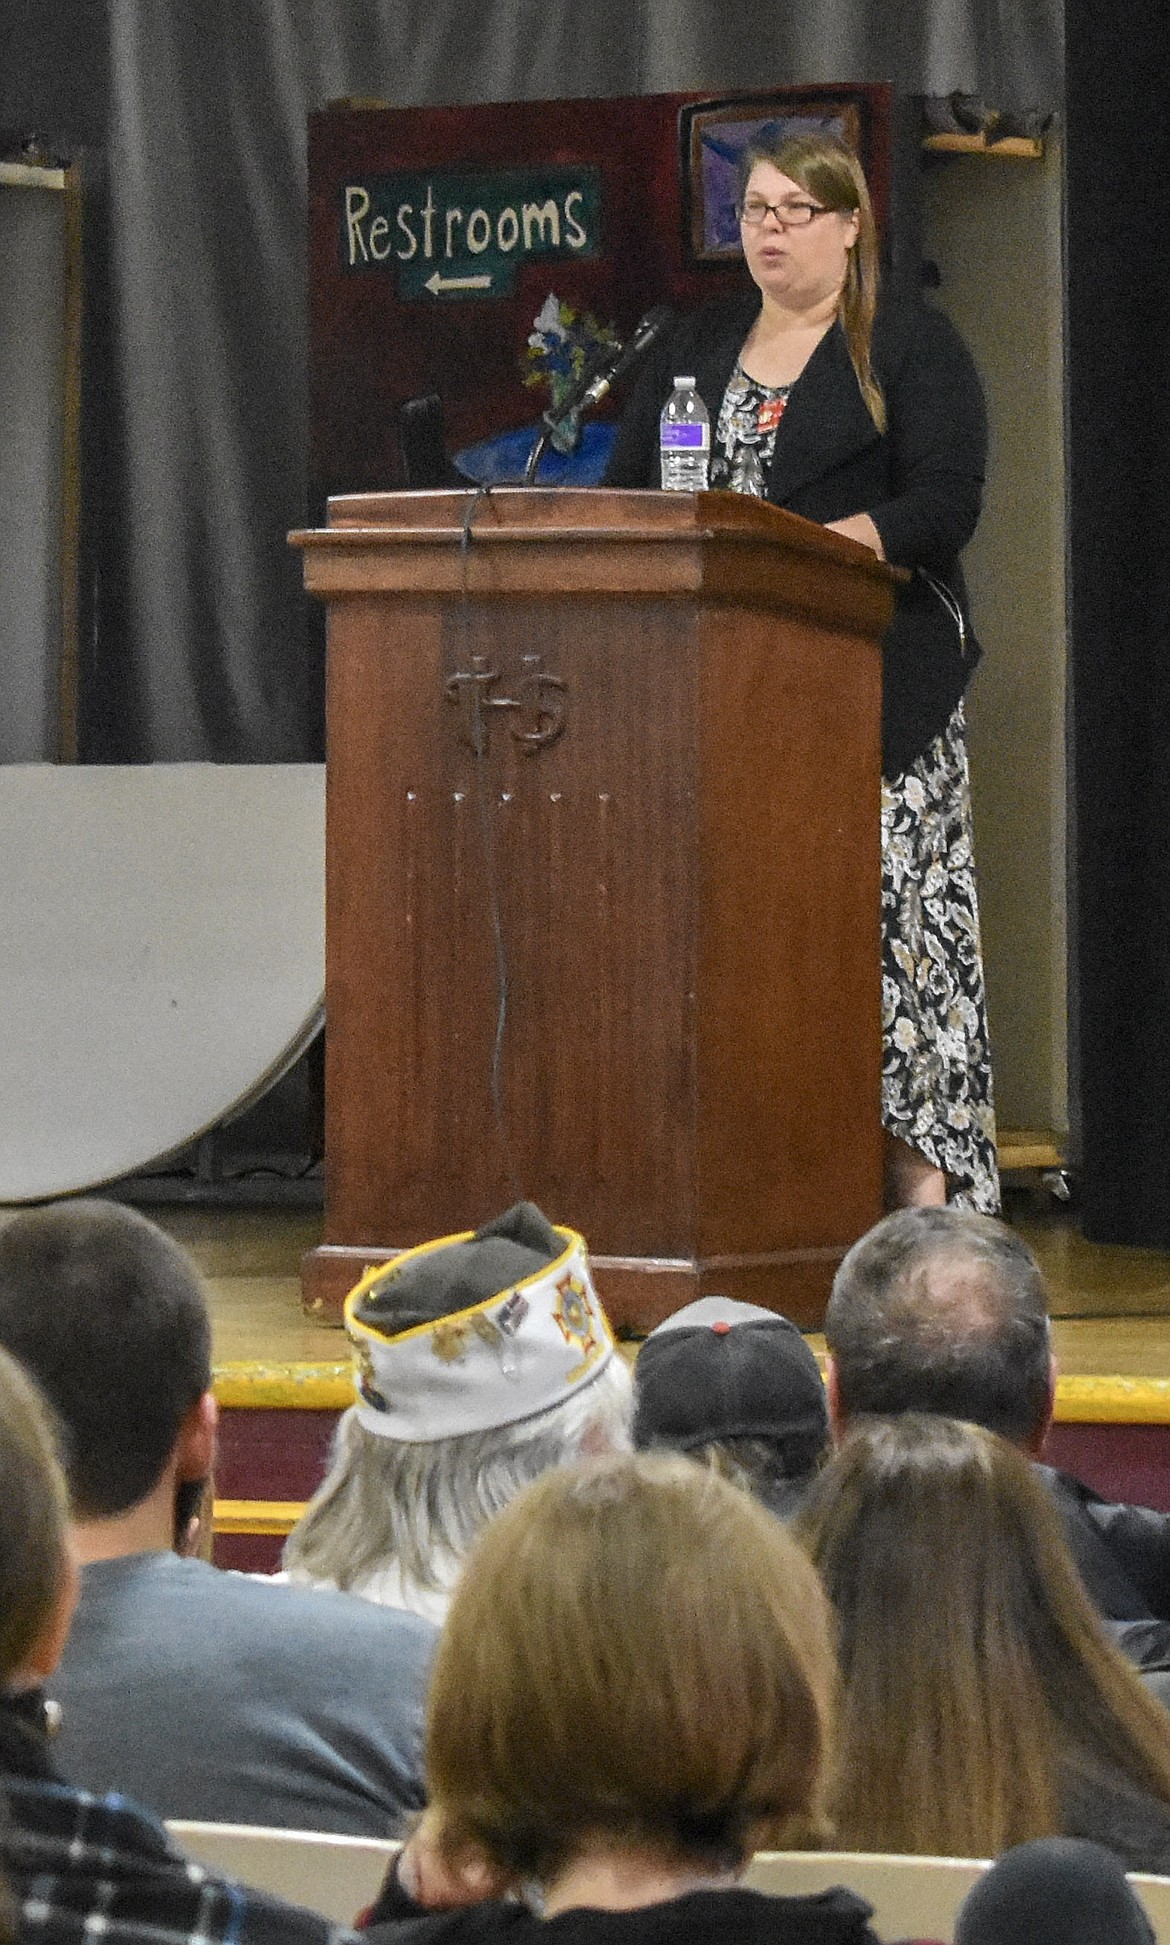 Montana State VFW Jr. Vice Commander Rose Arnold speaks to the Troy Middle-High School and U.S. military veteran guests. Arnold spoke about her service with the U.S. Army in Iraq and challenges she faced as a female soldier. She encouraged the students to stand up for what is right regardless the personal sacrifice, and to demonstrate gratitude for the sacrifices of servicemembers by the way they work, serve others and live their own lives. (Ben Kibbey/The Western News)